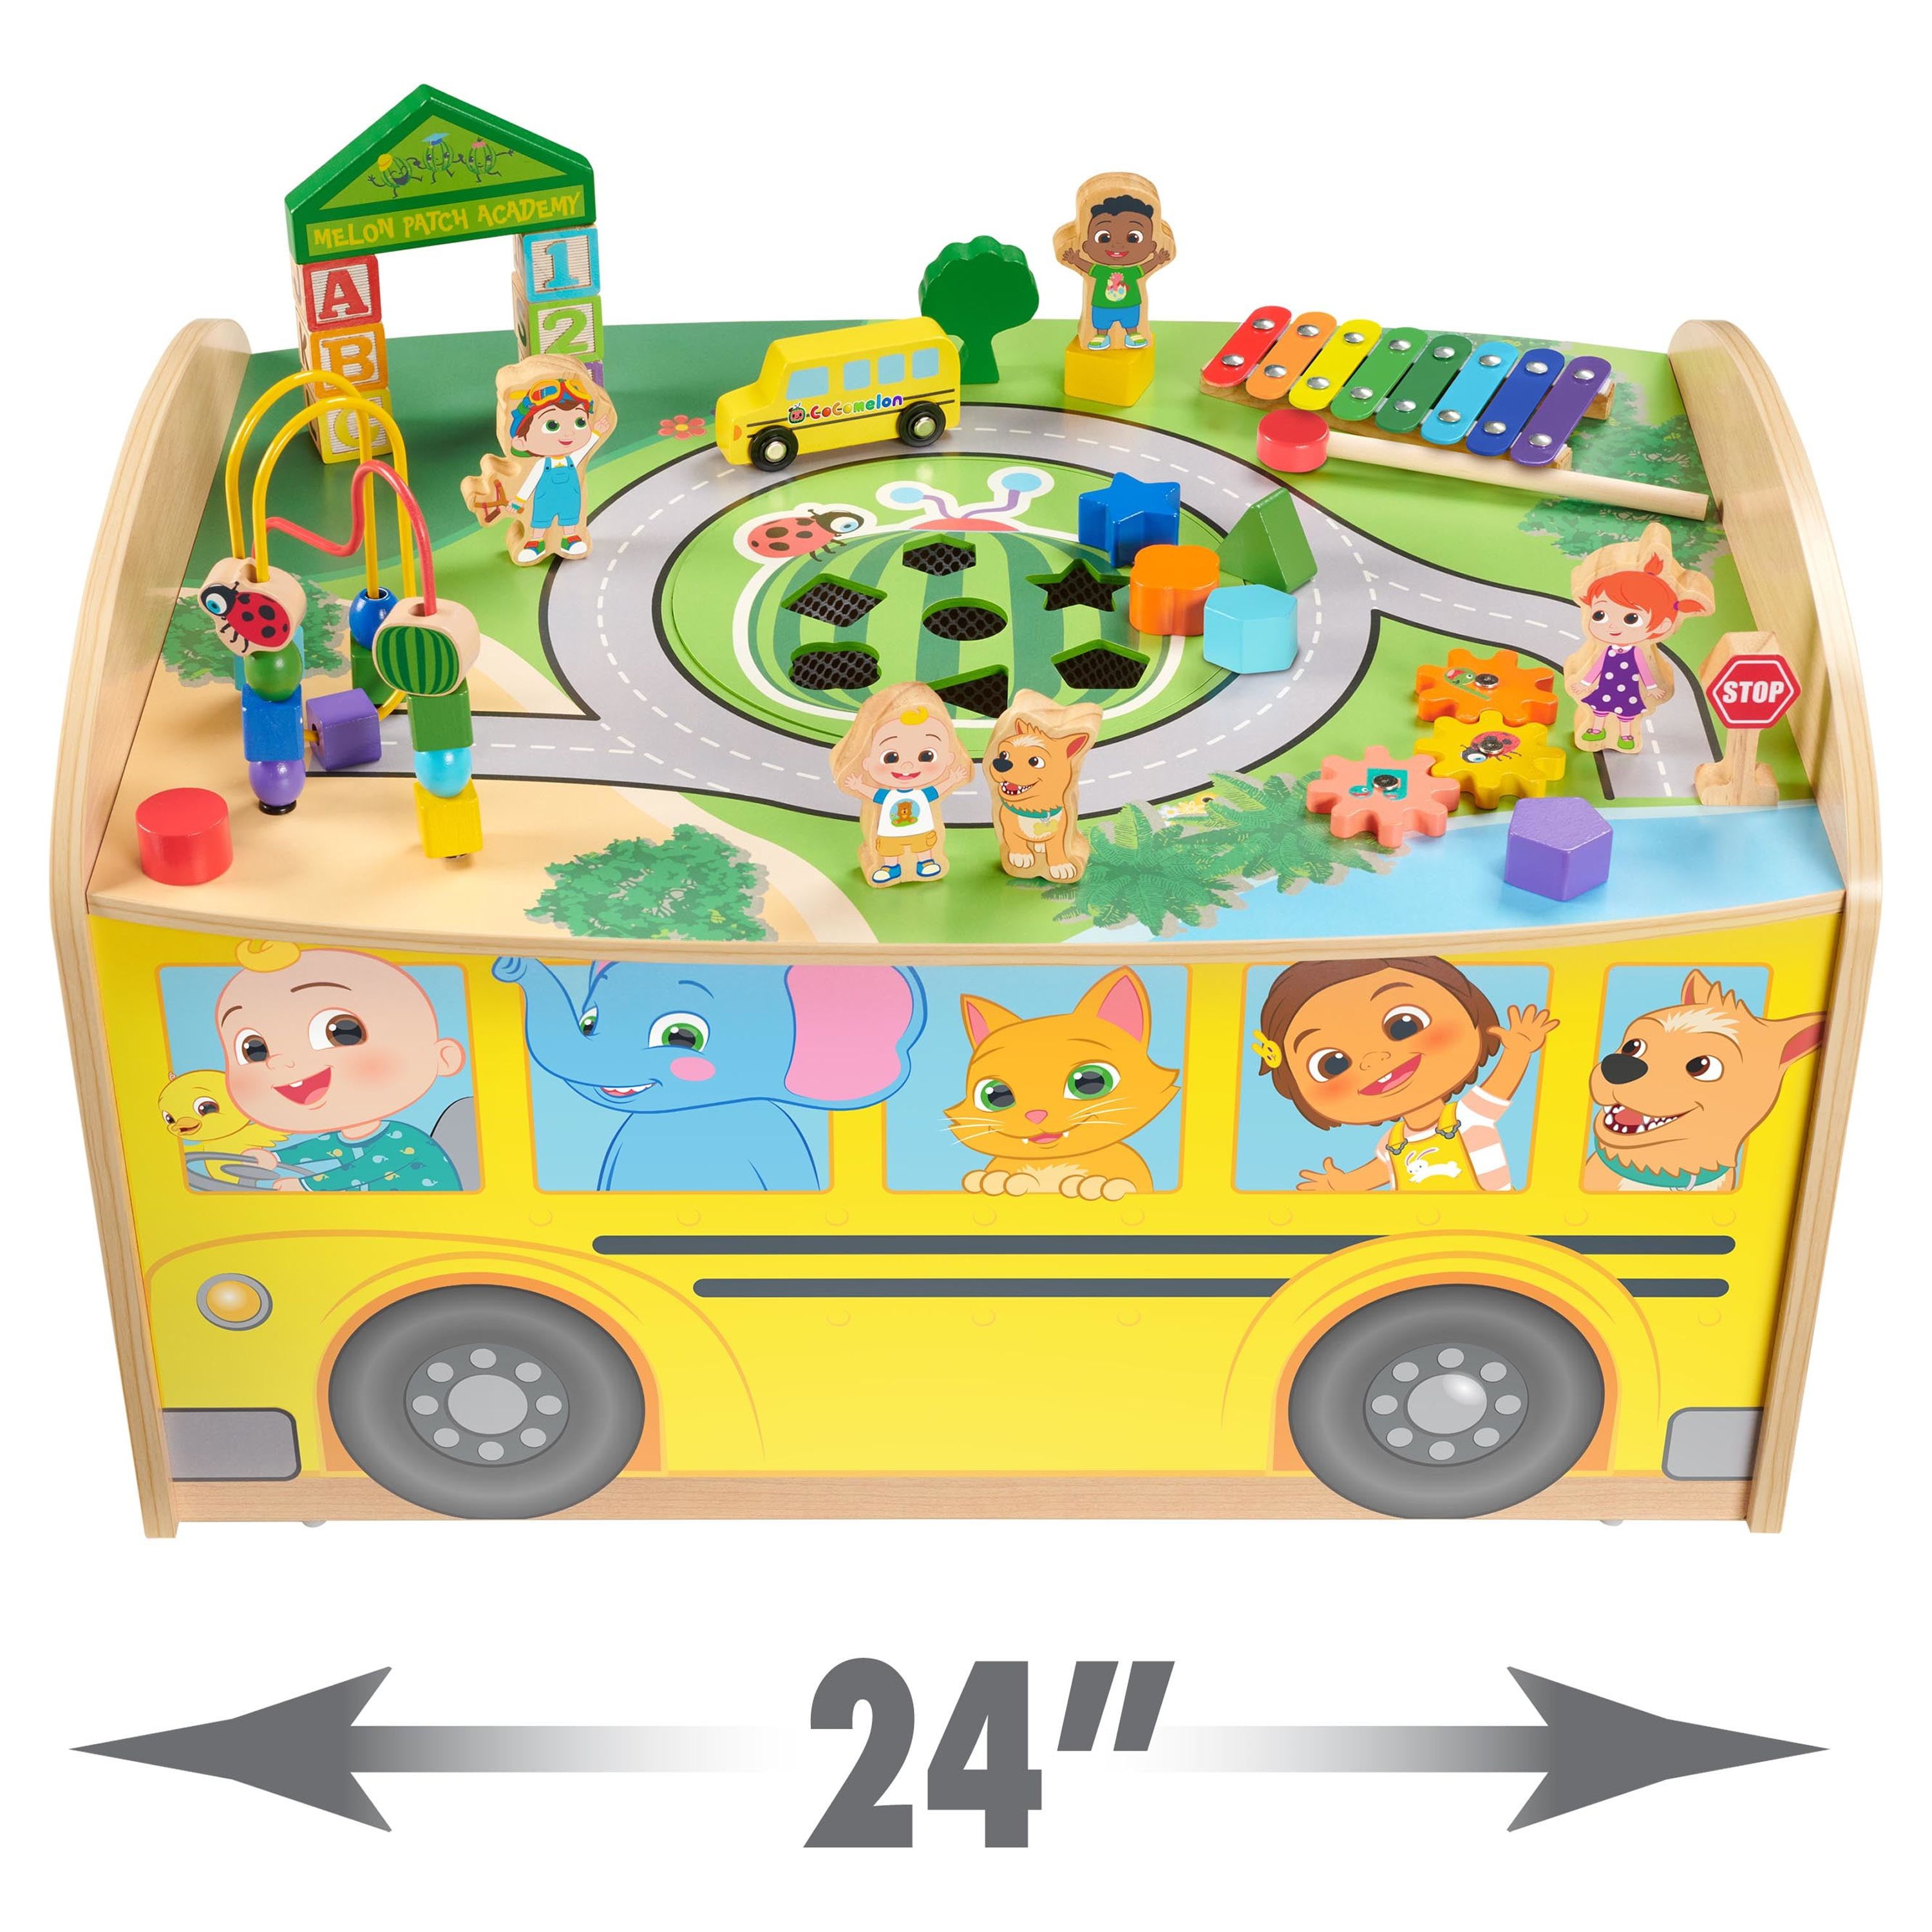 Cocomelon Wheels on the Bus Wooden Activity Table, Recycled Wood, for Toddlers 18 Months+ - image 3 of 7